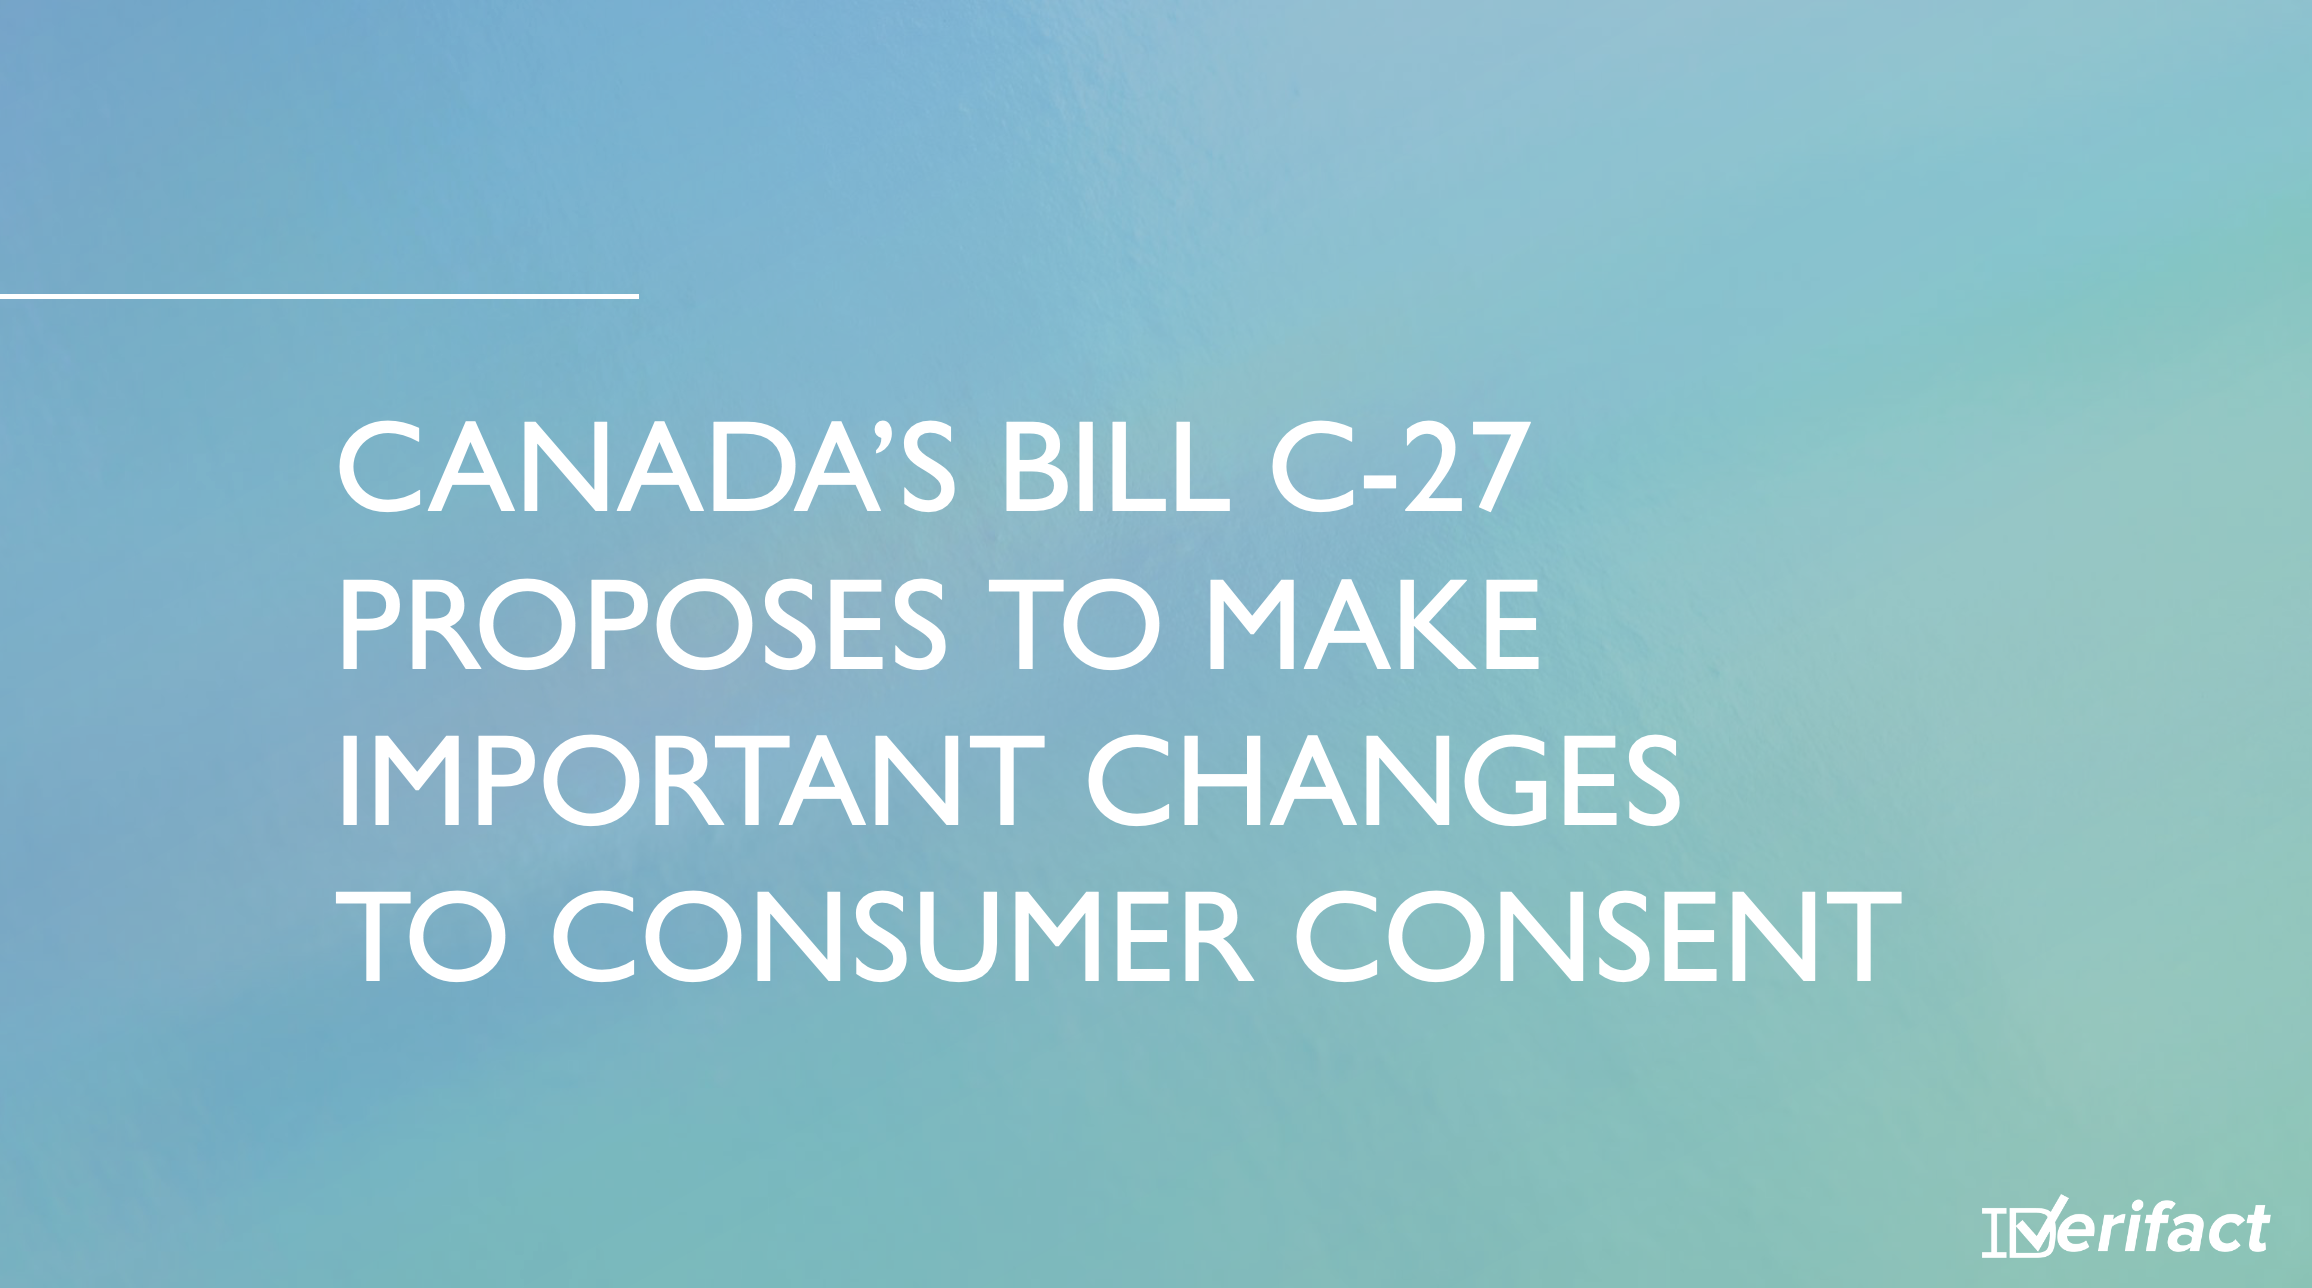 Bill C-27 Proposes Changes to Consumer Consent